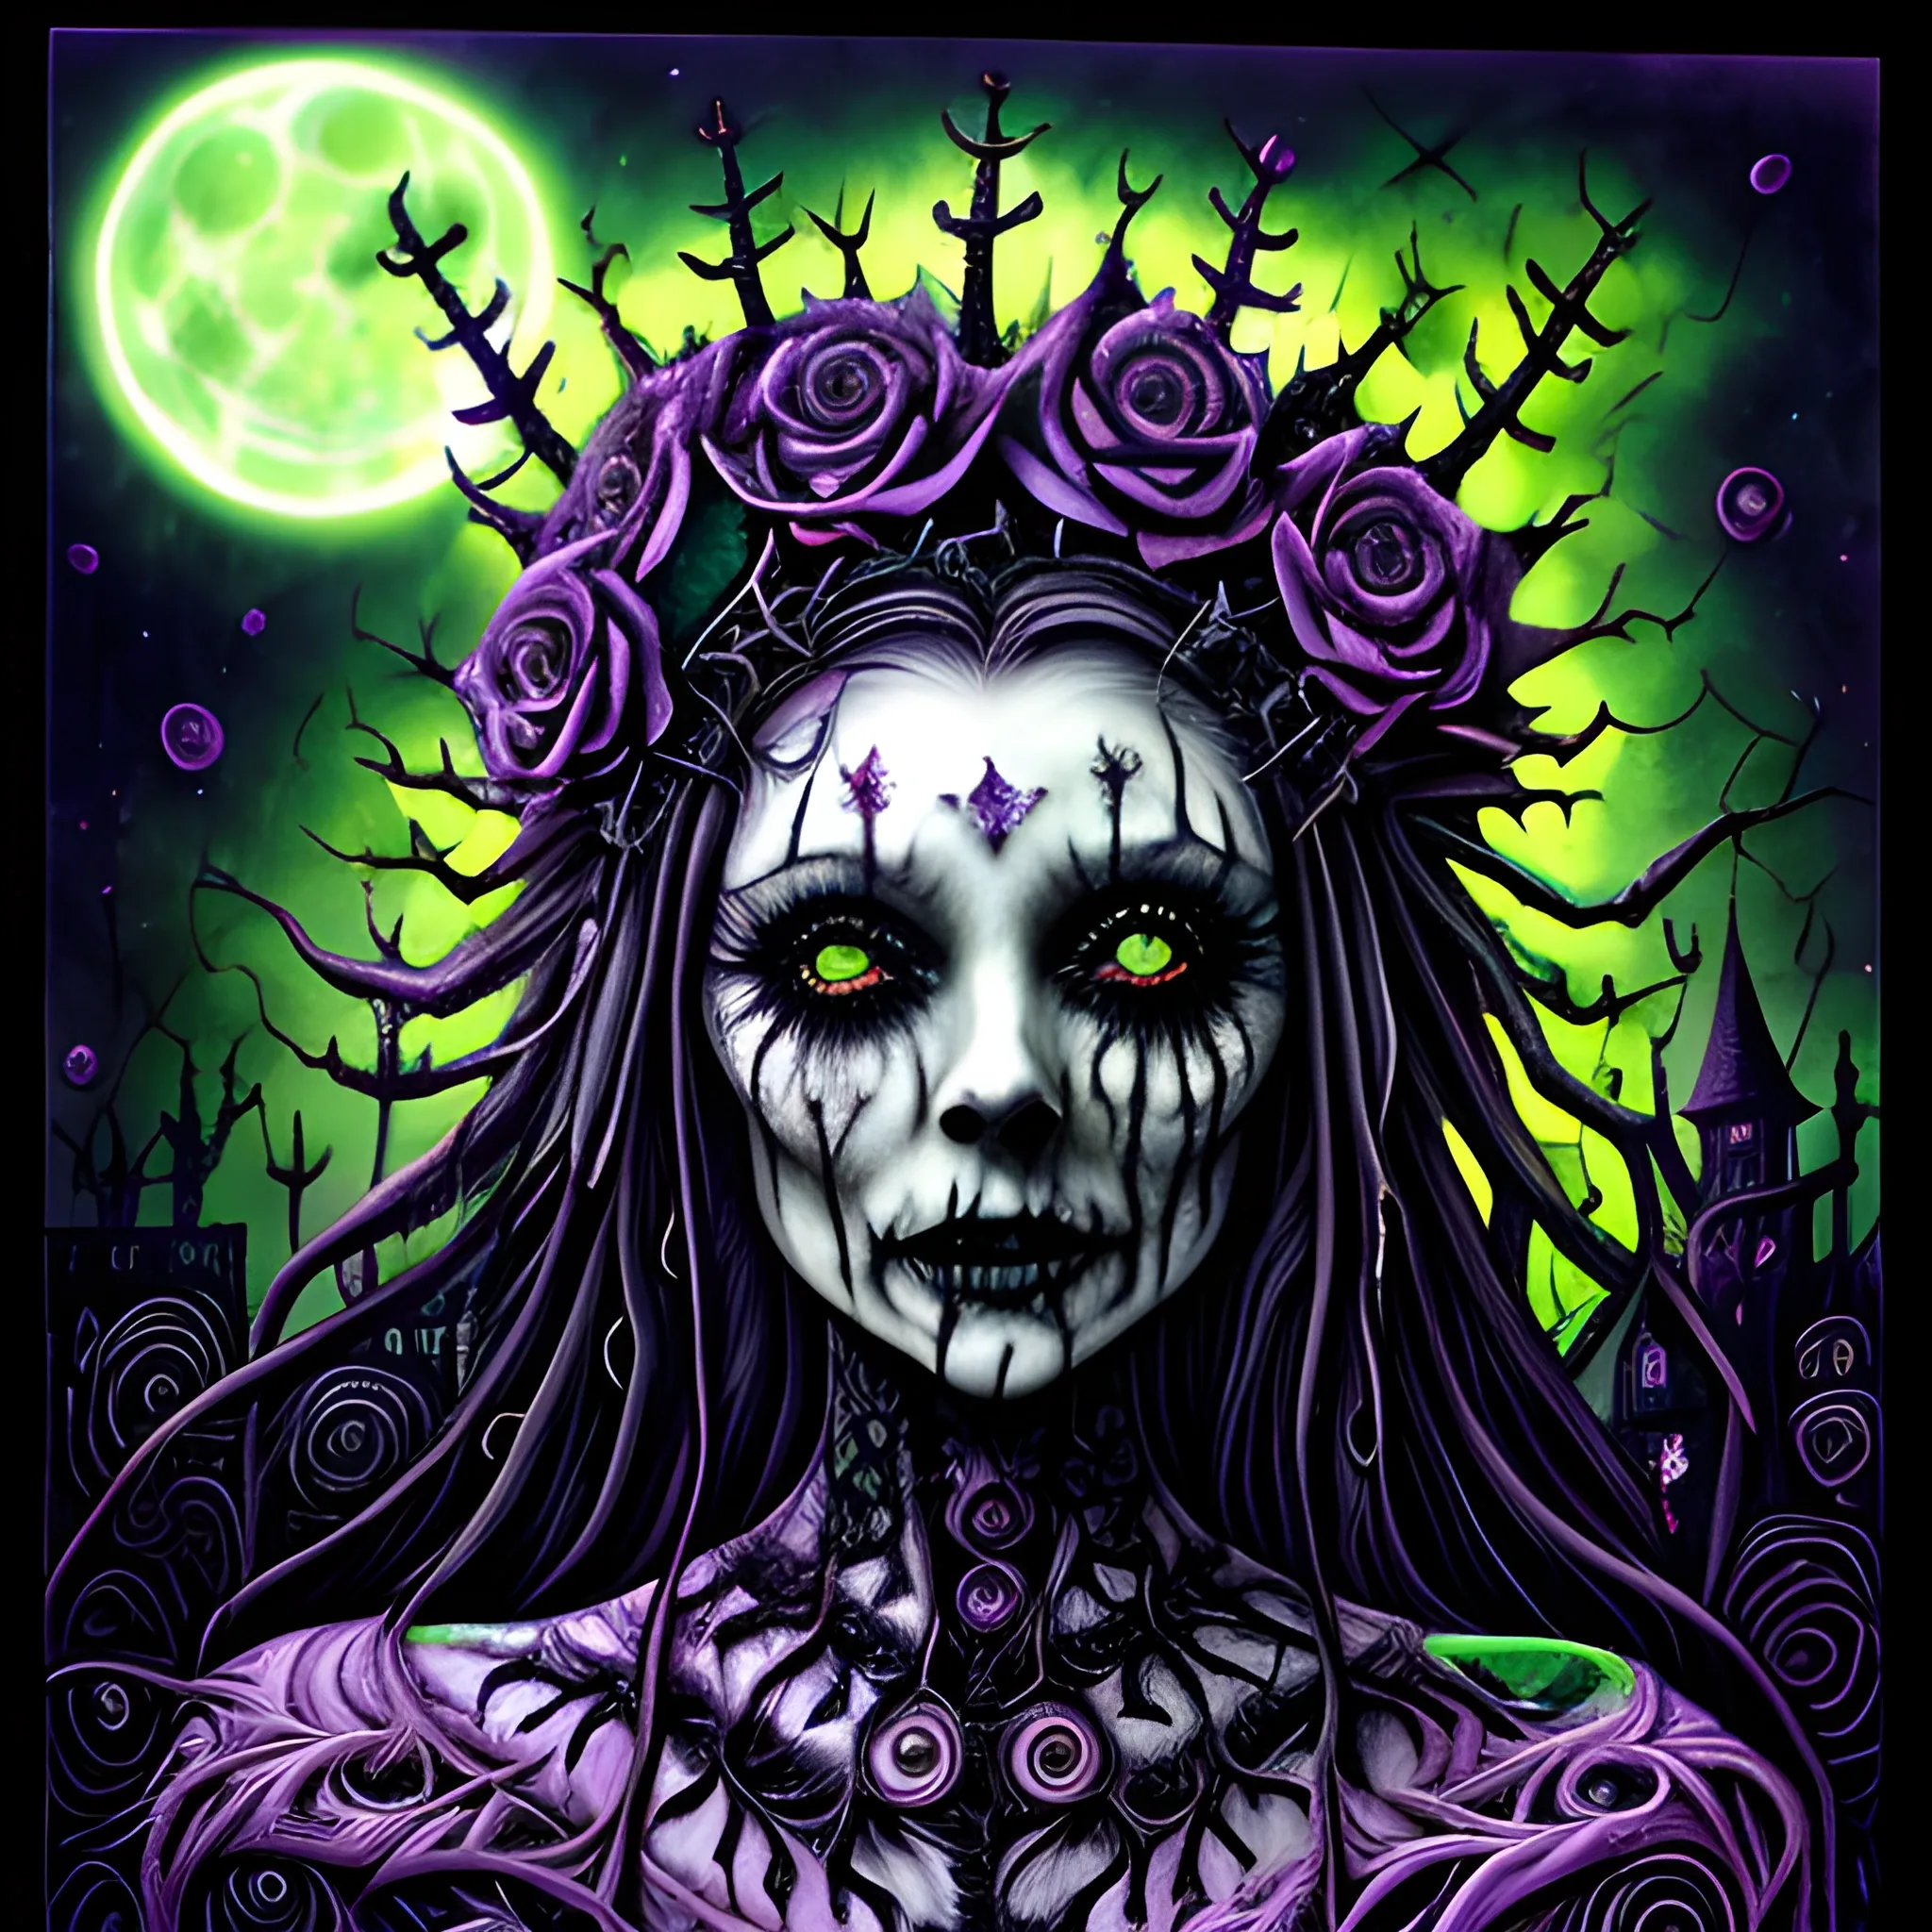 a woman wearing a thorny crown of black roses and weeping black tears, Halloween, bats, full moon in a nebula sky, neon spray paint, acrylic paint, fantastical surrealist world, in the style of Stephen Gammell, extremely detailed Zentangle style, sick, gothic, eldritch, candles, neon grape purple, dayglo orange, chartreuse green, Halloween